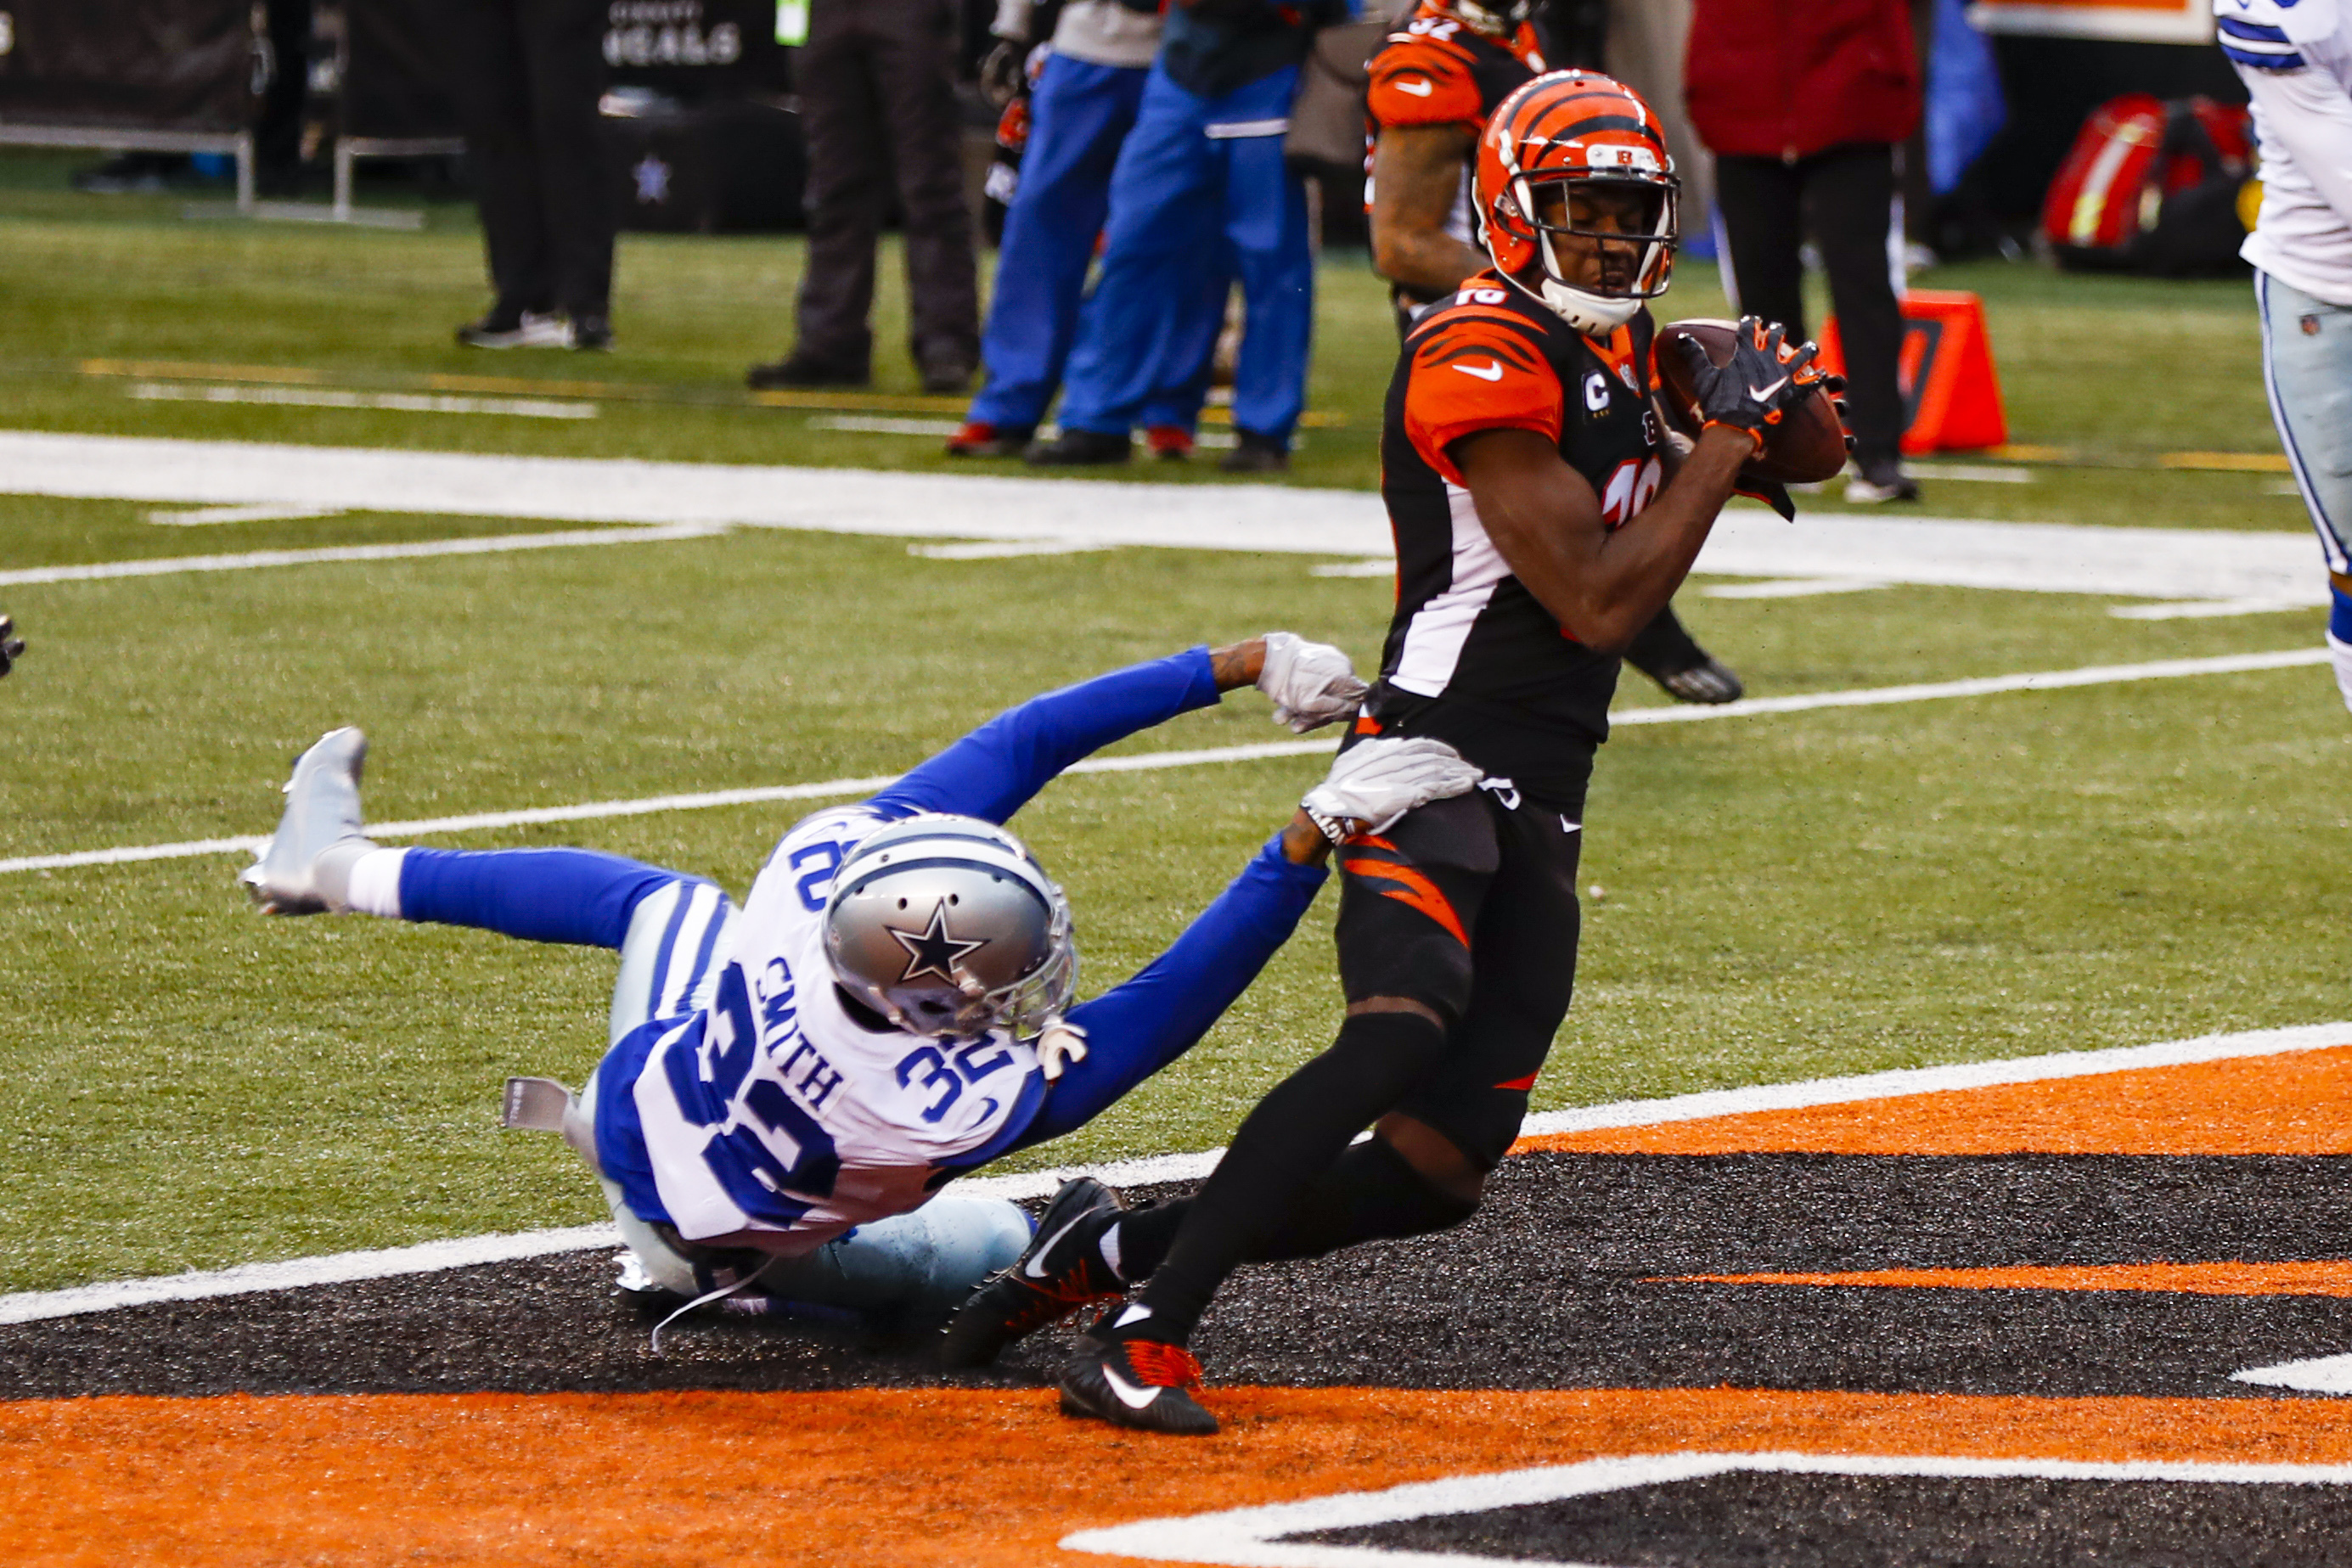 Adam Schefter on X: The NFL's New Year's Eve party: Bengals at